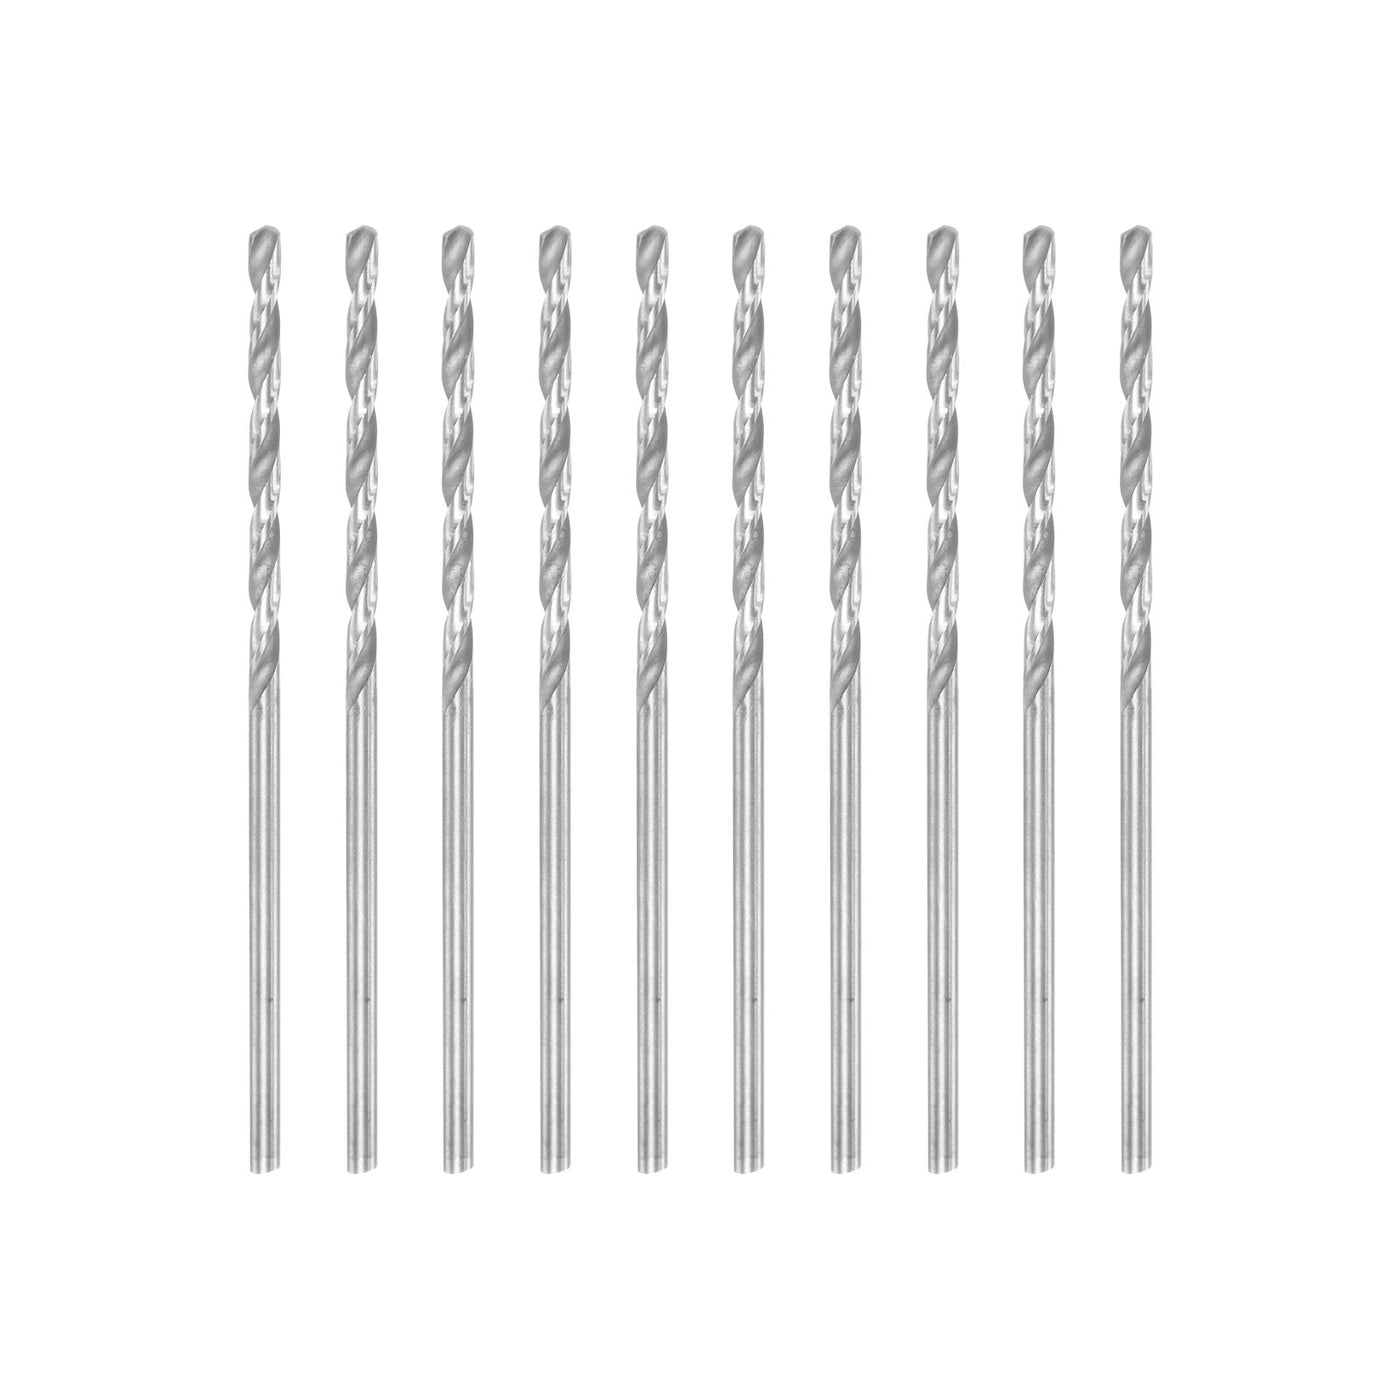 uxcell Uxcell 10 Pcs 1.75mm High Speed Steel Drill Bits, Fully Ground 52mm Length Drill Bit